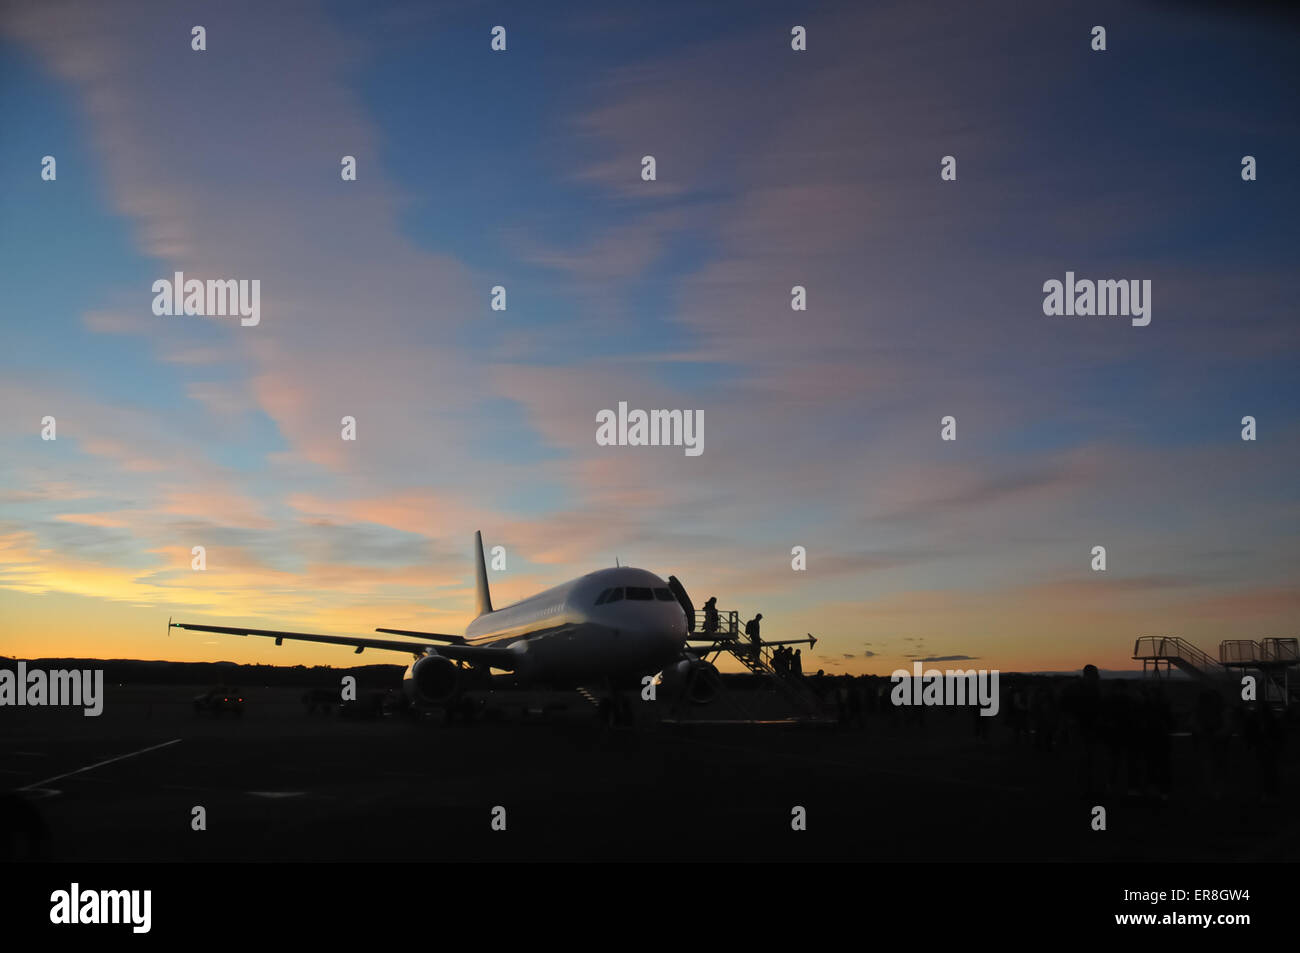 Airplane at the early morning with passengers Stock Photo